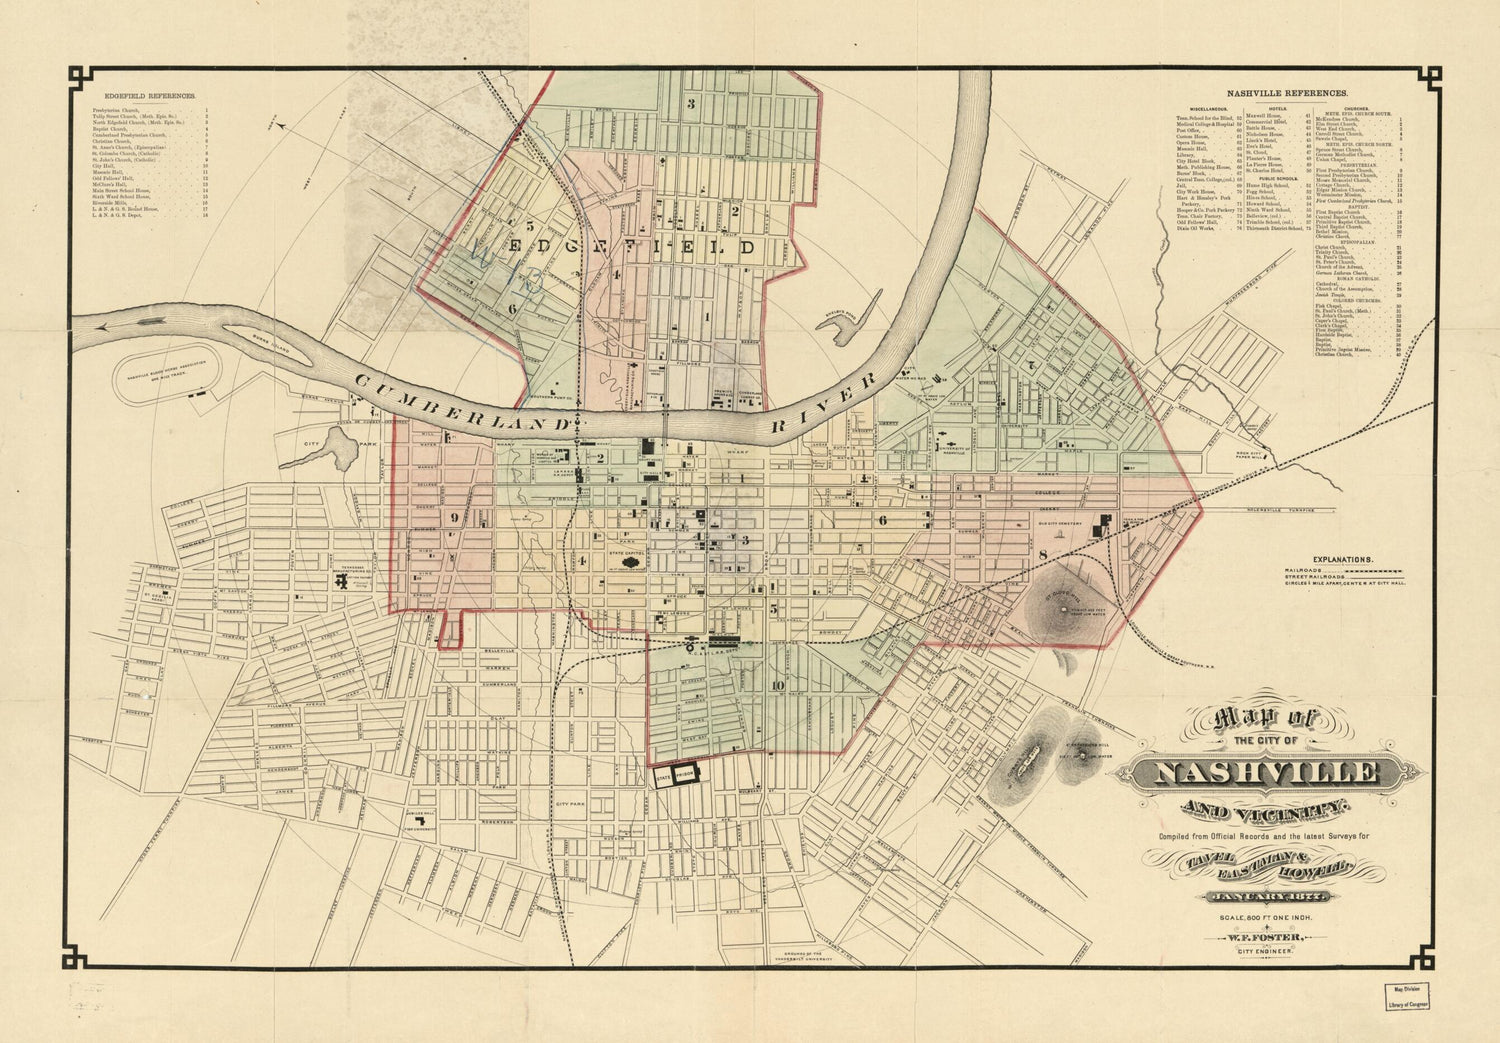 This old map of Map of the City of Nashville and Vicinity from 1877 was created by Wilbur F. Foster in 1877